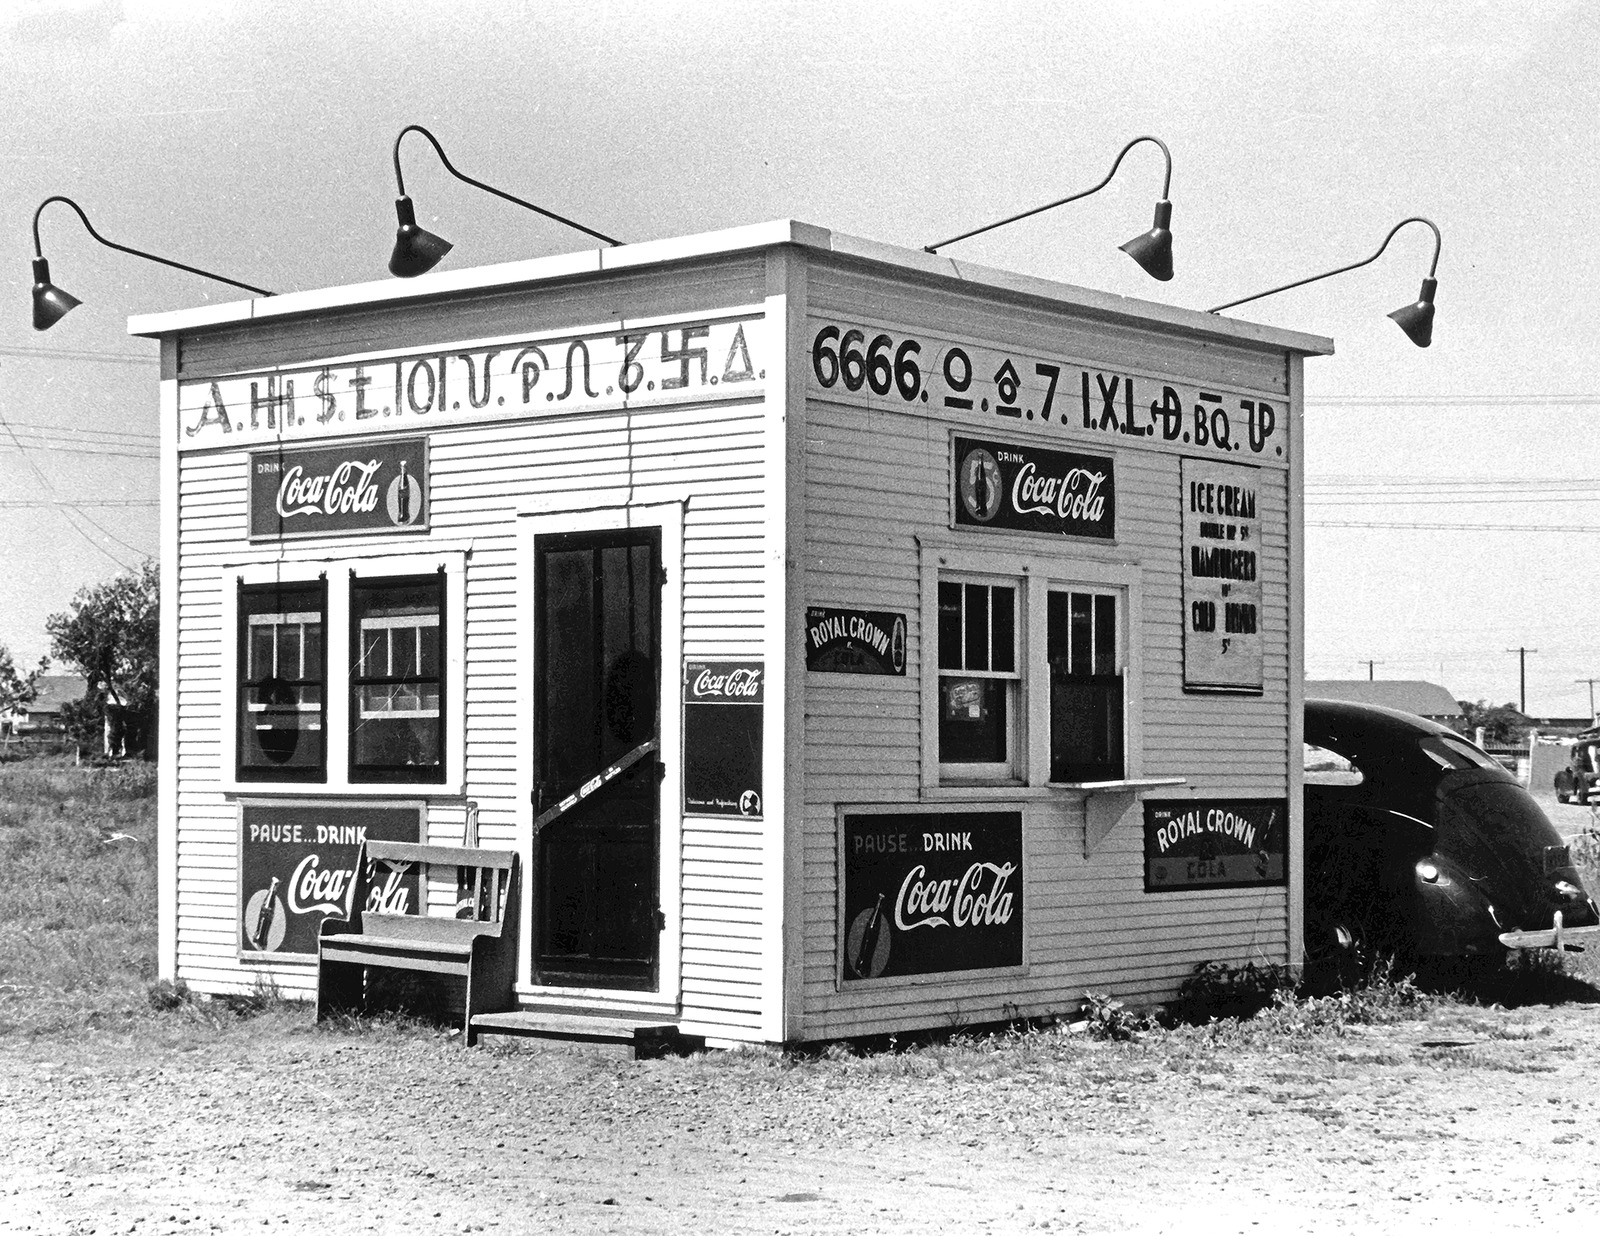 1939 Hamburger Stand Dumas Texas Classic Vintage Old Picture Photo Print 8x10